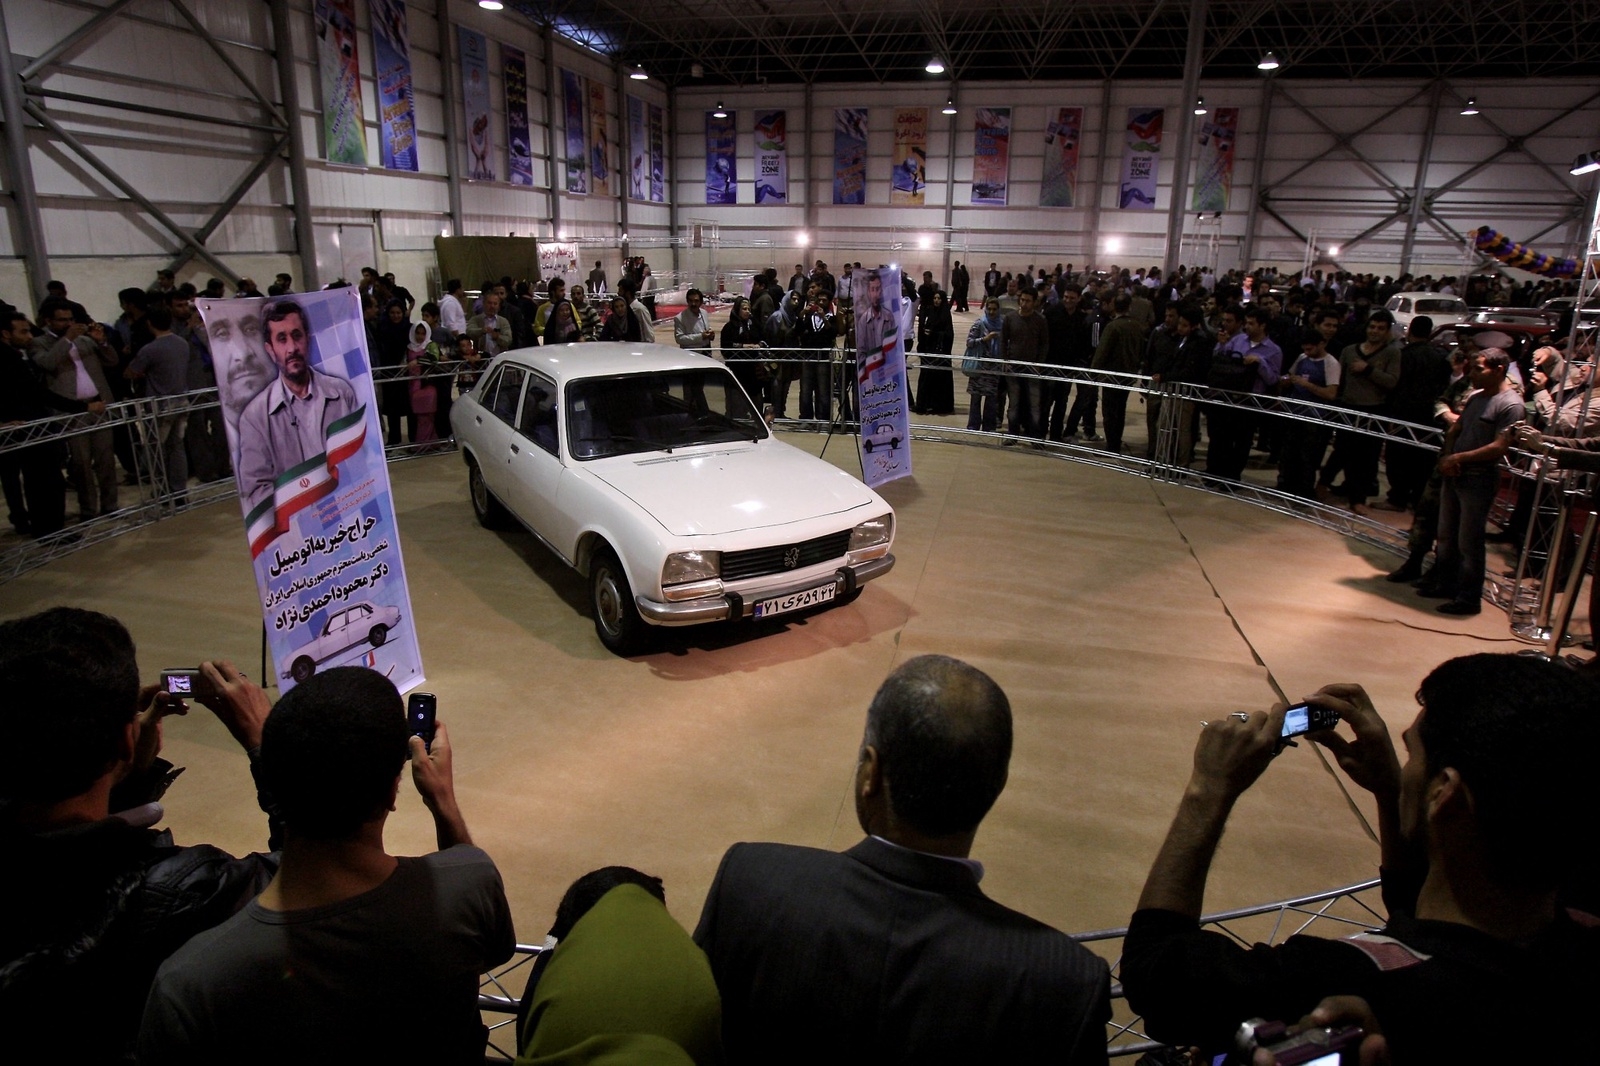 Iranians take photographs of Iranian President Mahmoud Ahmadinejad's car, as it is displayed at an auto show for auction for a charity in the city of Abadan, 600 miles (1000 kilometers) southwest of the capital Tehran, Iran, Wednesday, Feb. 23, 2011. Iran's populist president is putting his 33-year-old Peugeot up for auction for a charity that funds housing projects for young people. Ahmadinejad's move is seen as a bid to appeal to the young and attract attention to housing projects he espoused during his campaigns, promising to put a roof over the head of every poor Iranian. (AP Photo/Vahid Salemi) / SCANPIX Code: 436